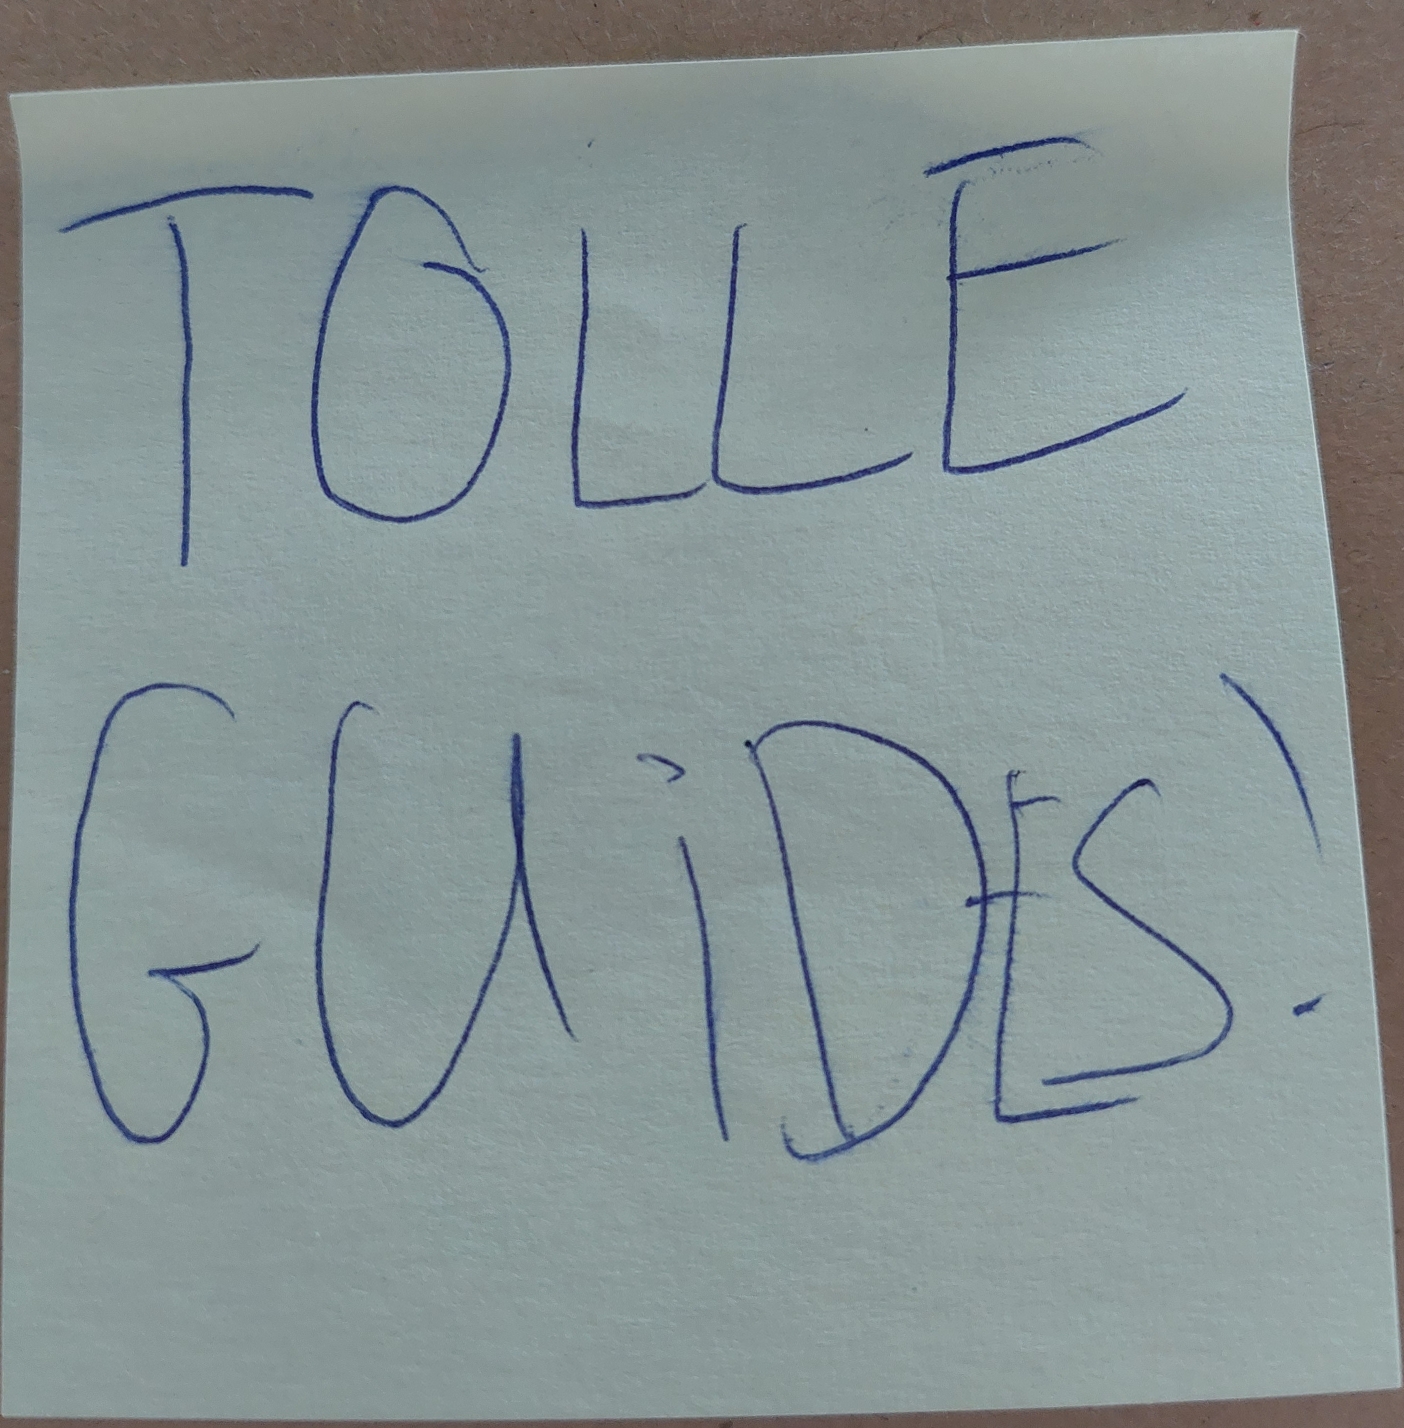 Tolle Guides!